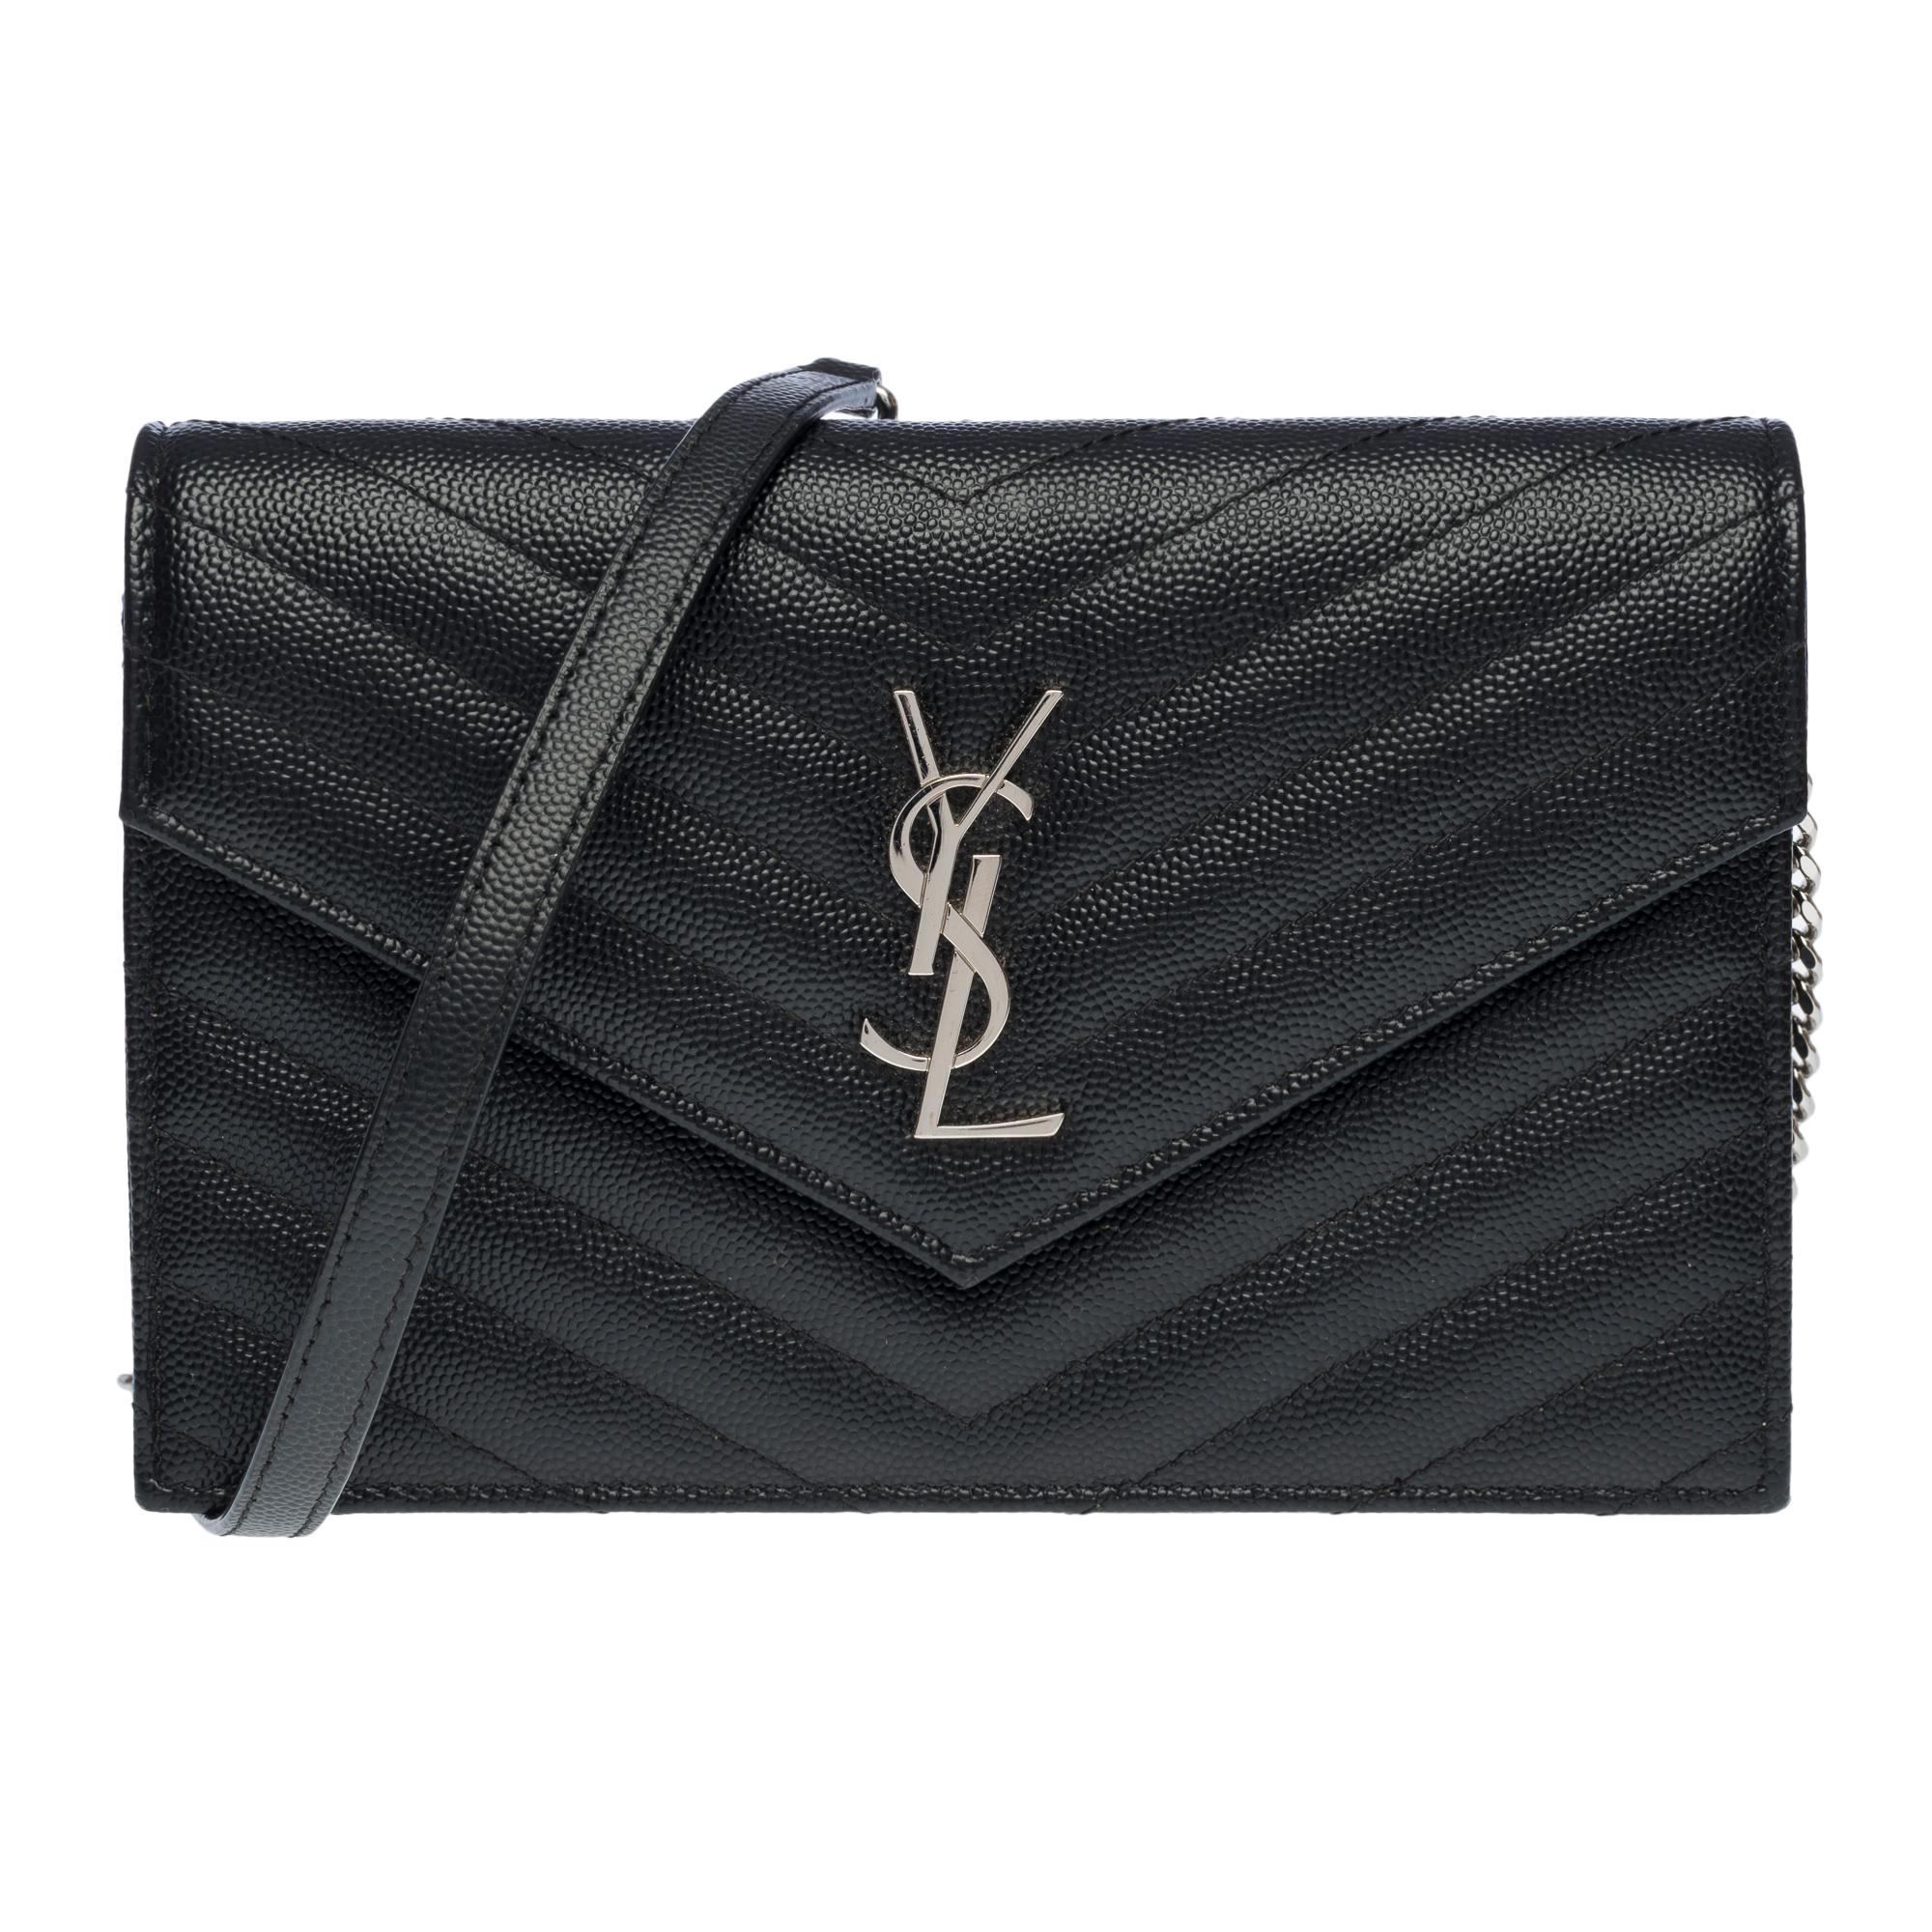 Amazing YSL Clutch Wallet shoulder bag chain decorated with the Cassandre and stitched with the iconic quilted herringbone
Compact and functional, it has a zipped compartment and card slots
Its removable chain with leather reinforcement allows a